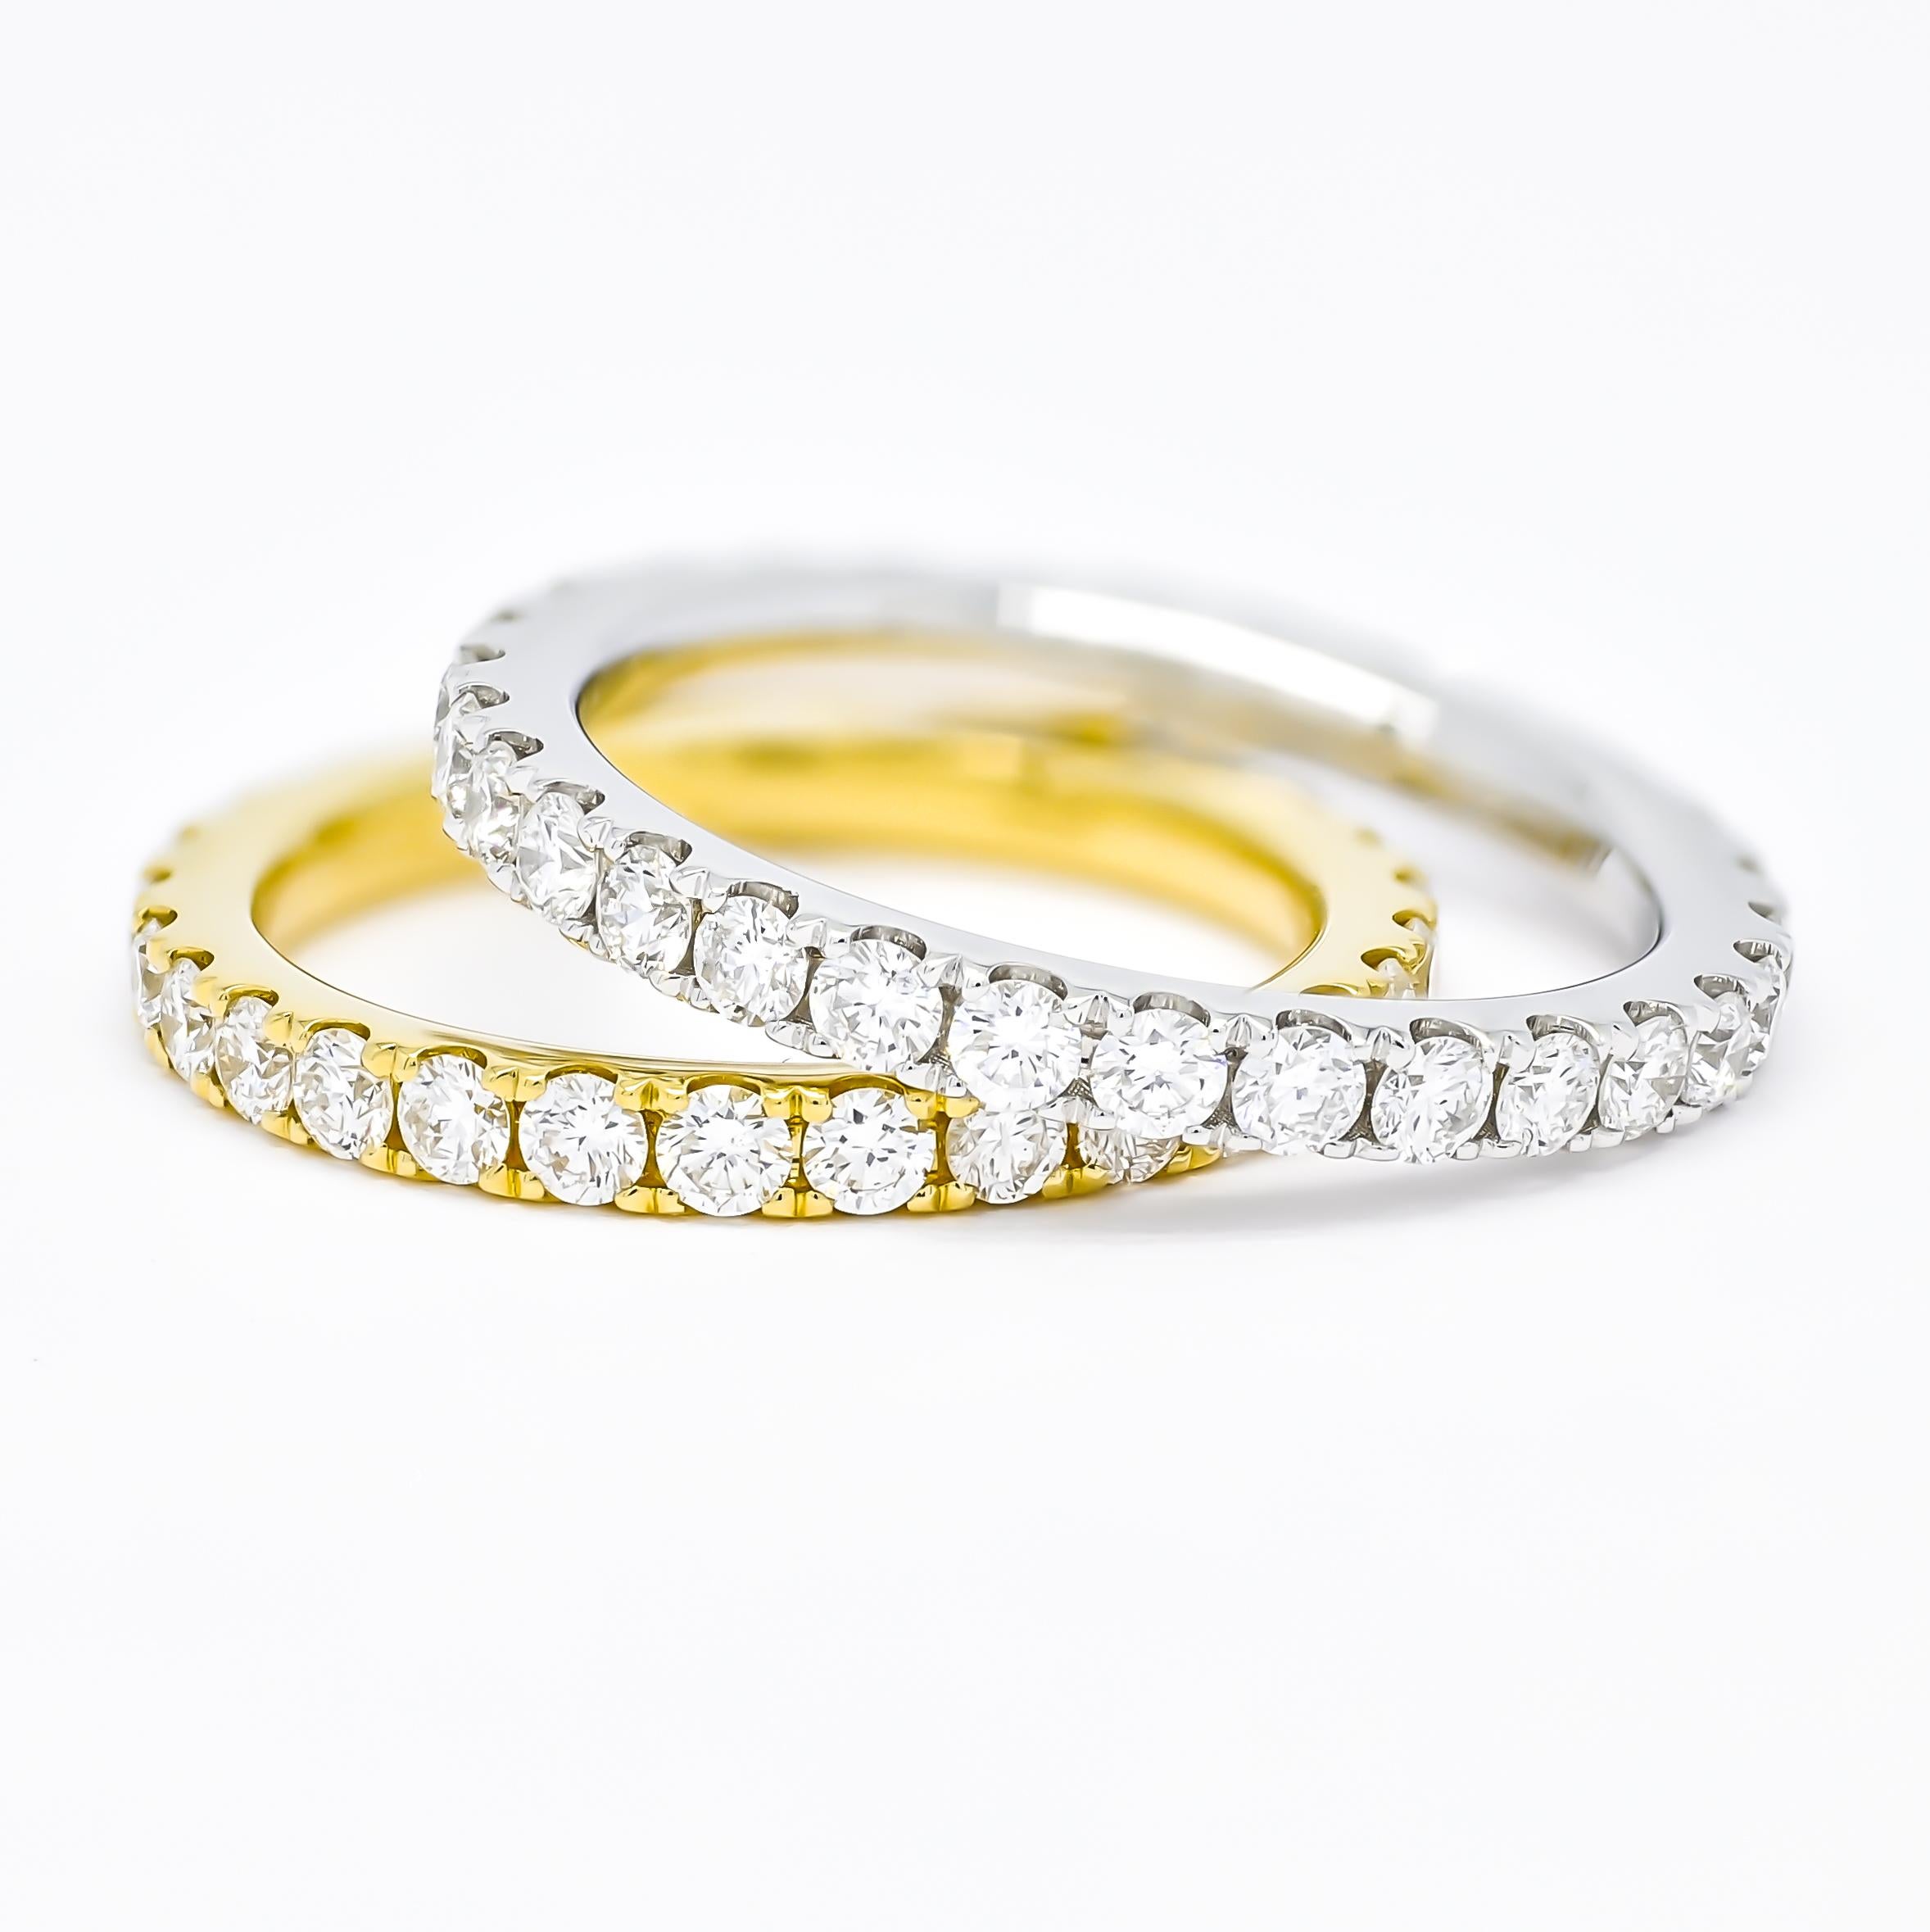 The brilliance of the diamonds is accentuated by the elegant and sleek white gold setting, allowing the light to dance and reflect off every facet, creating a breathtaking display of radiance.

Whether worn as a symbol of eternal love or as a